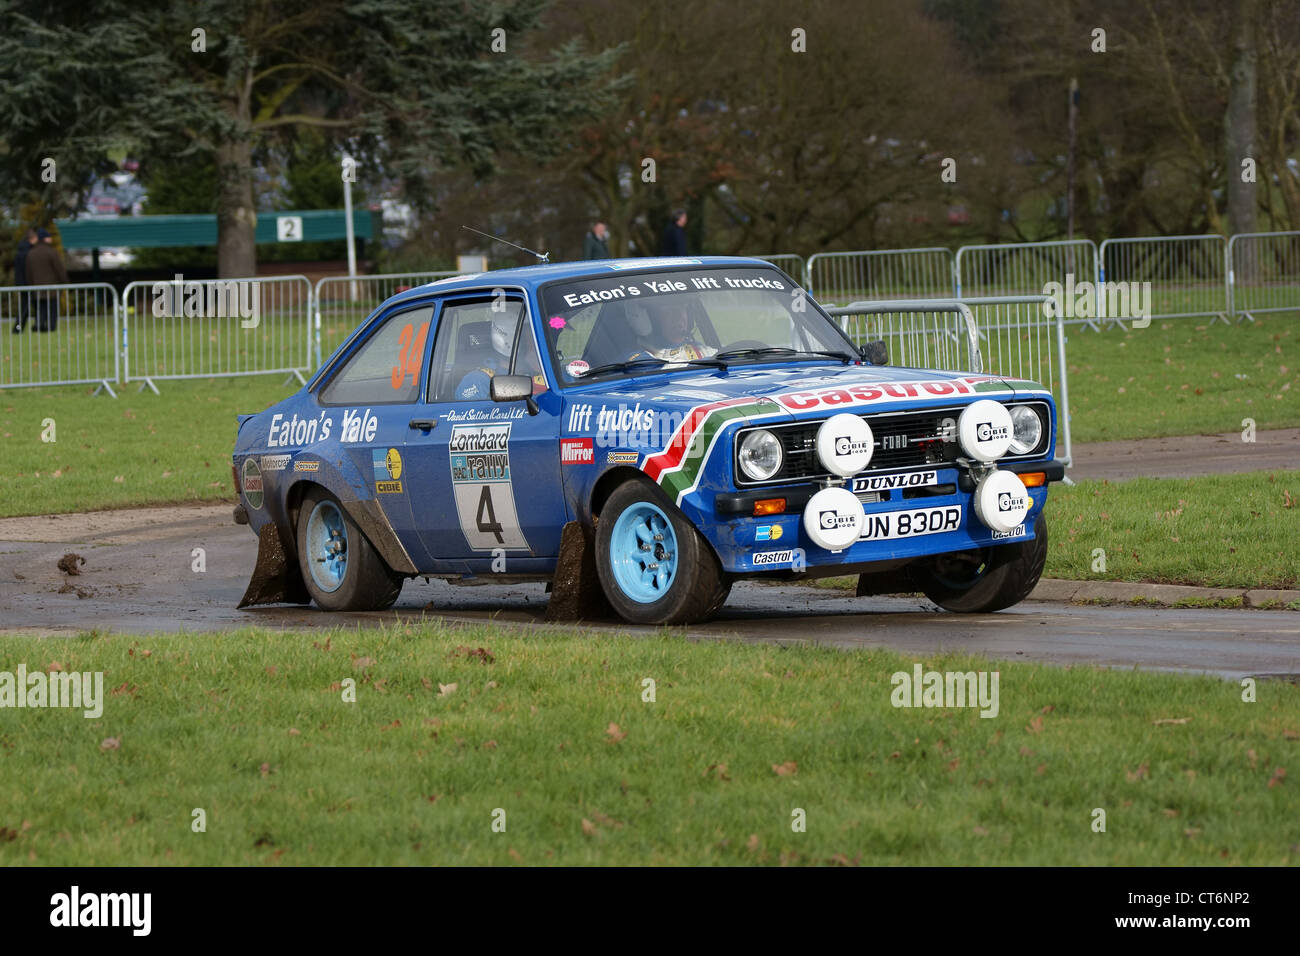 The famous Eaton's Yale Escort MK2 Rally Car demonstrating at RaceRetro Stock Photo